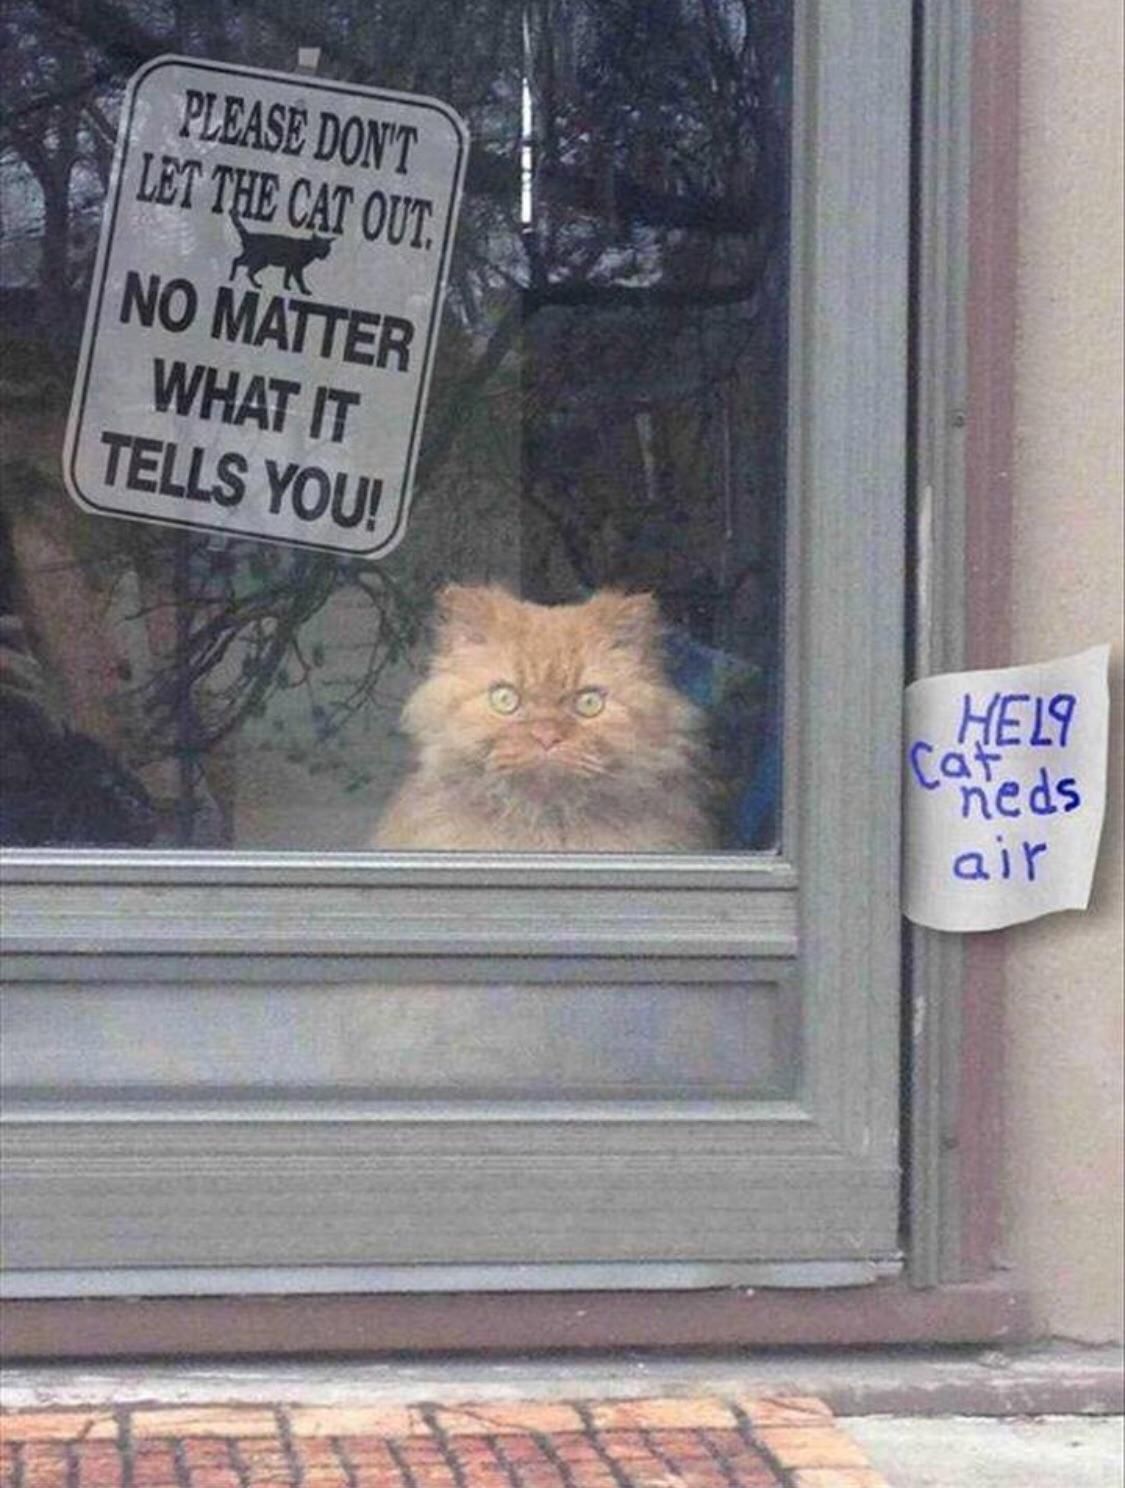 Don’t listen to the cat